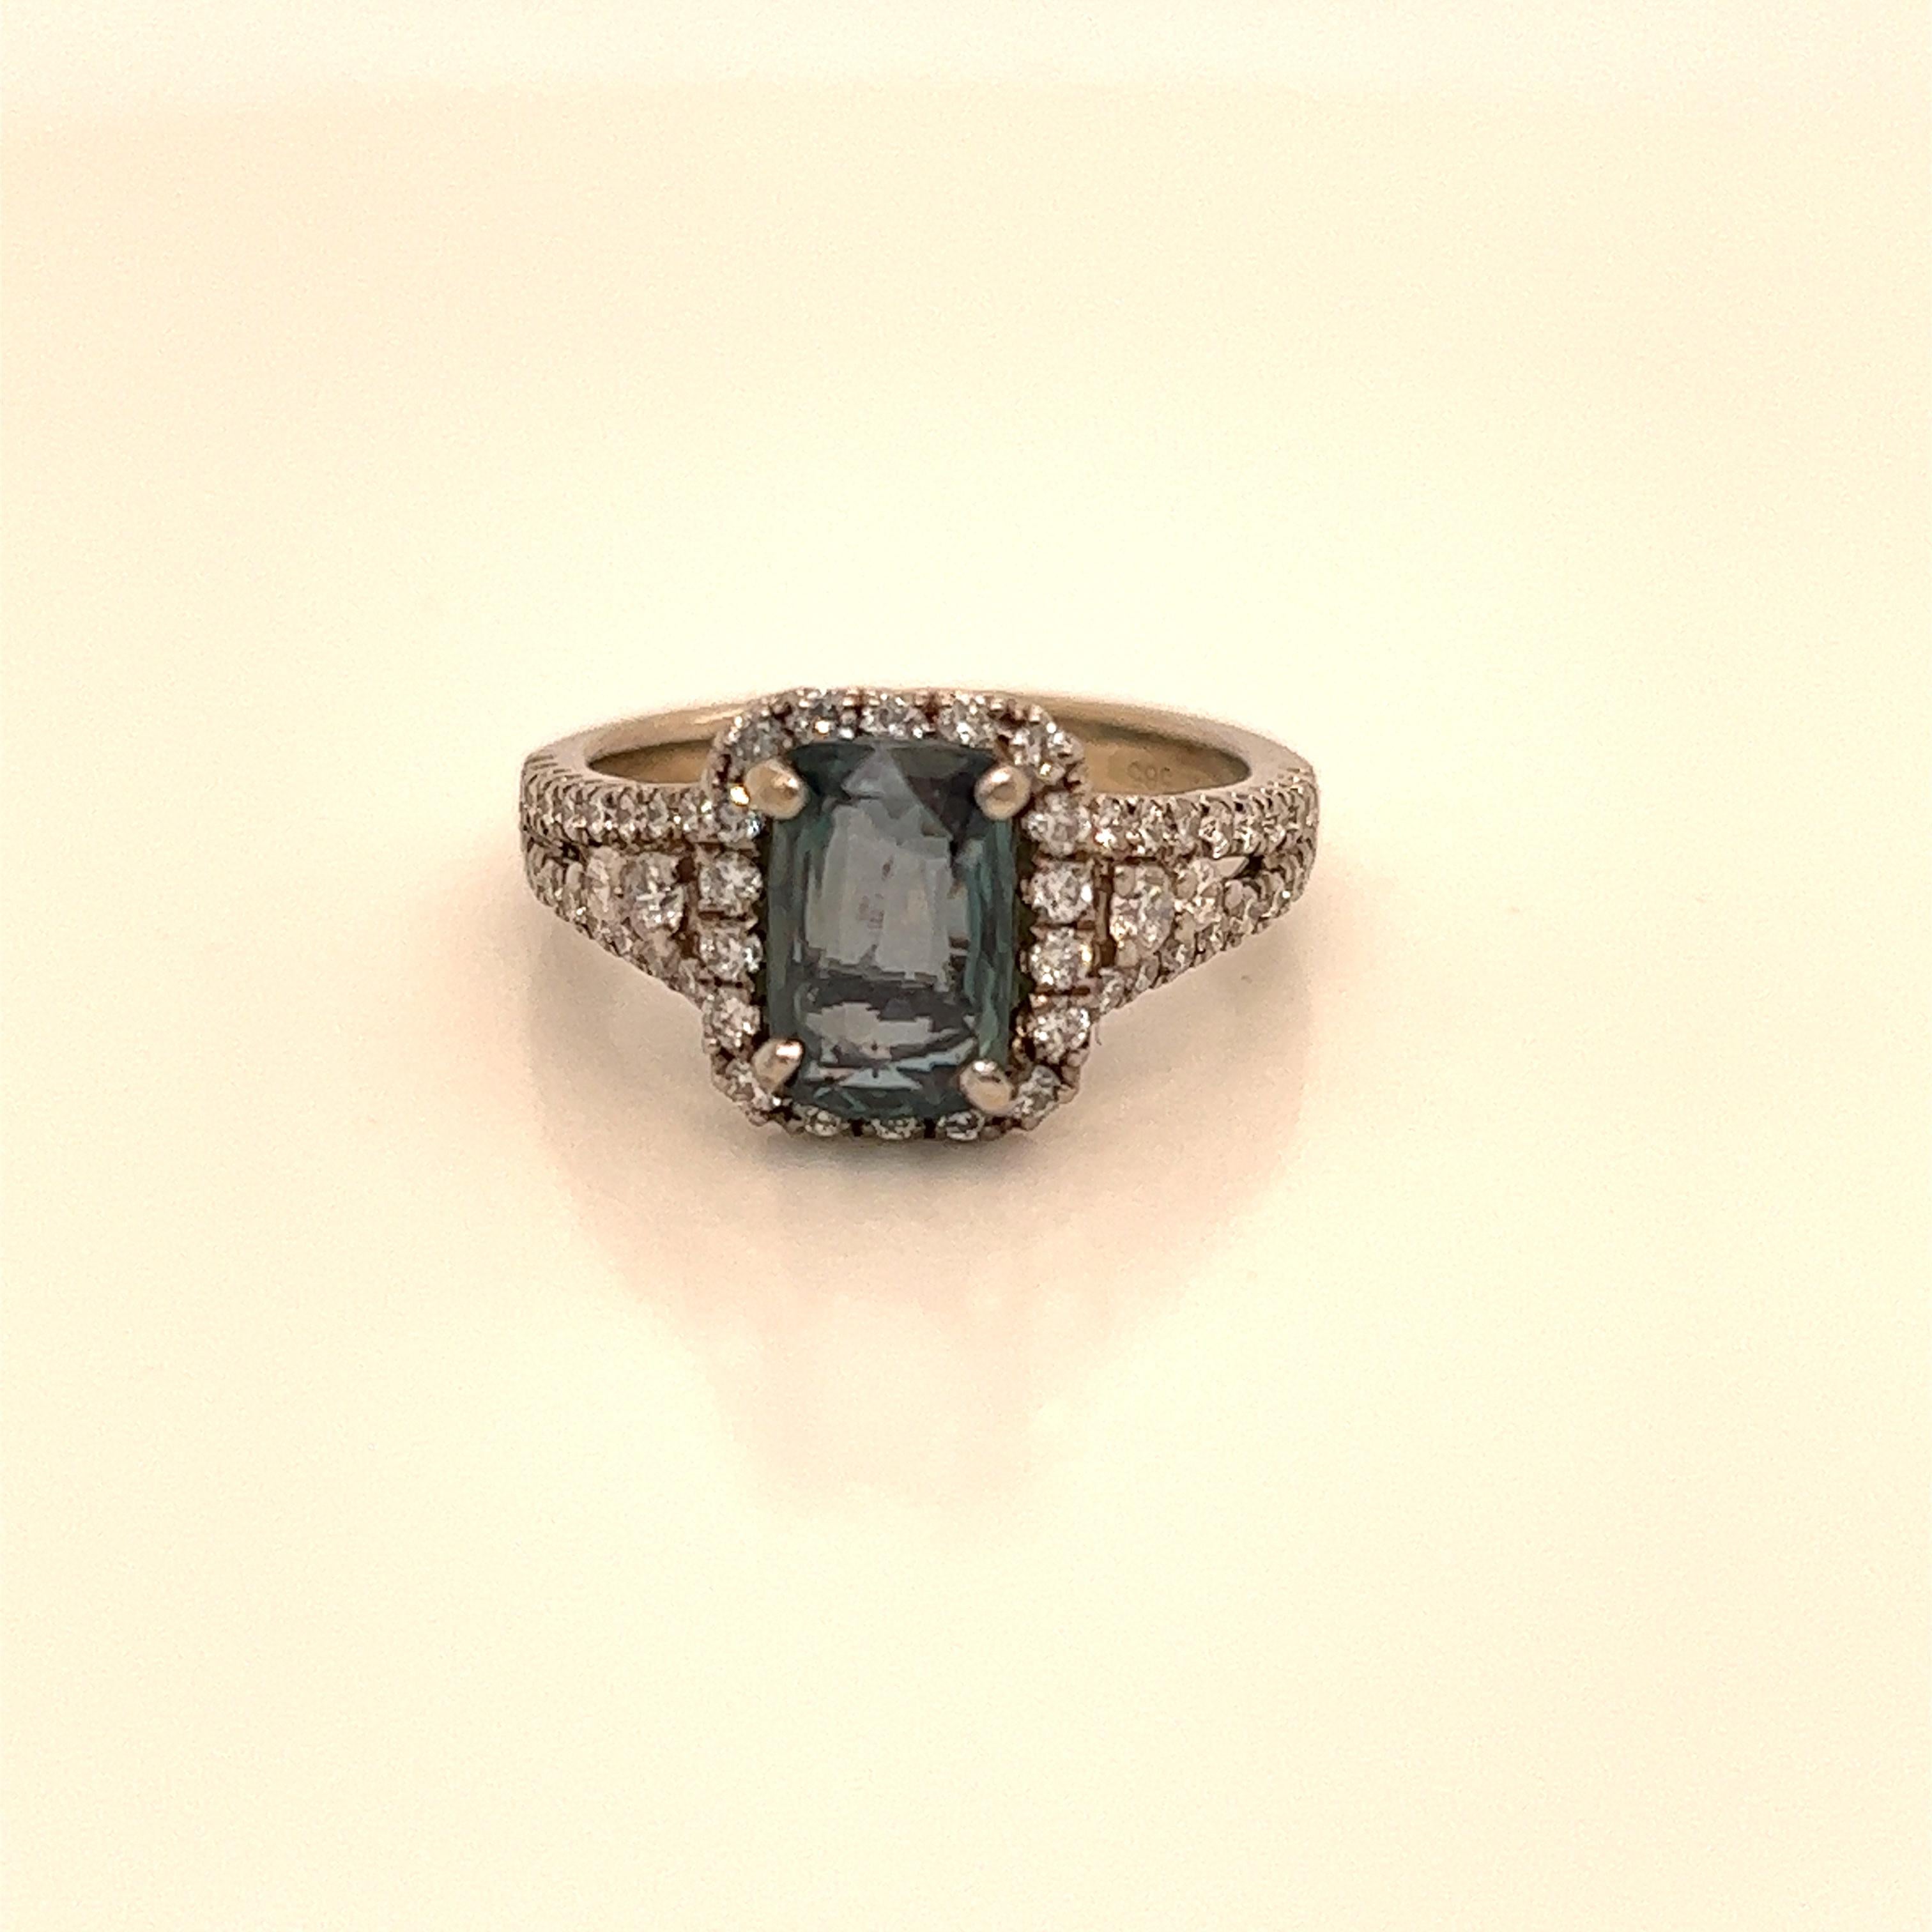 This is a gorgeous natural AAA quality Cushion Alexandrite surrounded by dainty diamonds that is set in solid 14K white gold. This ring features a natural 1.98 carat cushion alexandrite that is certified by the Gemological Institute of America